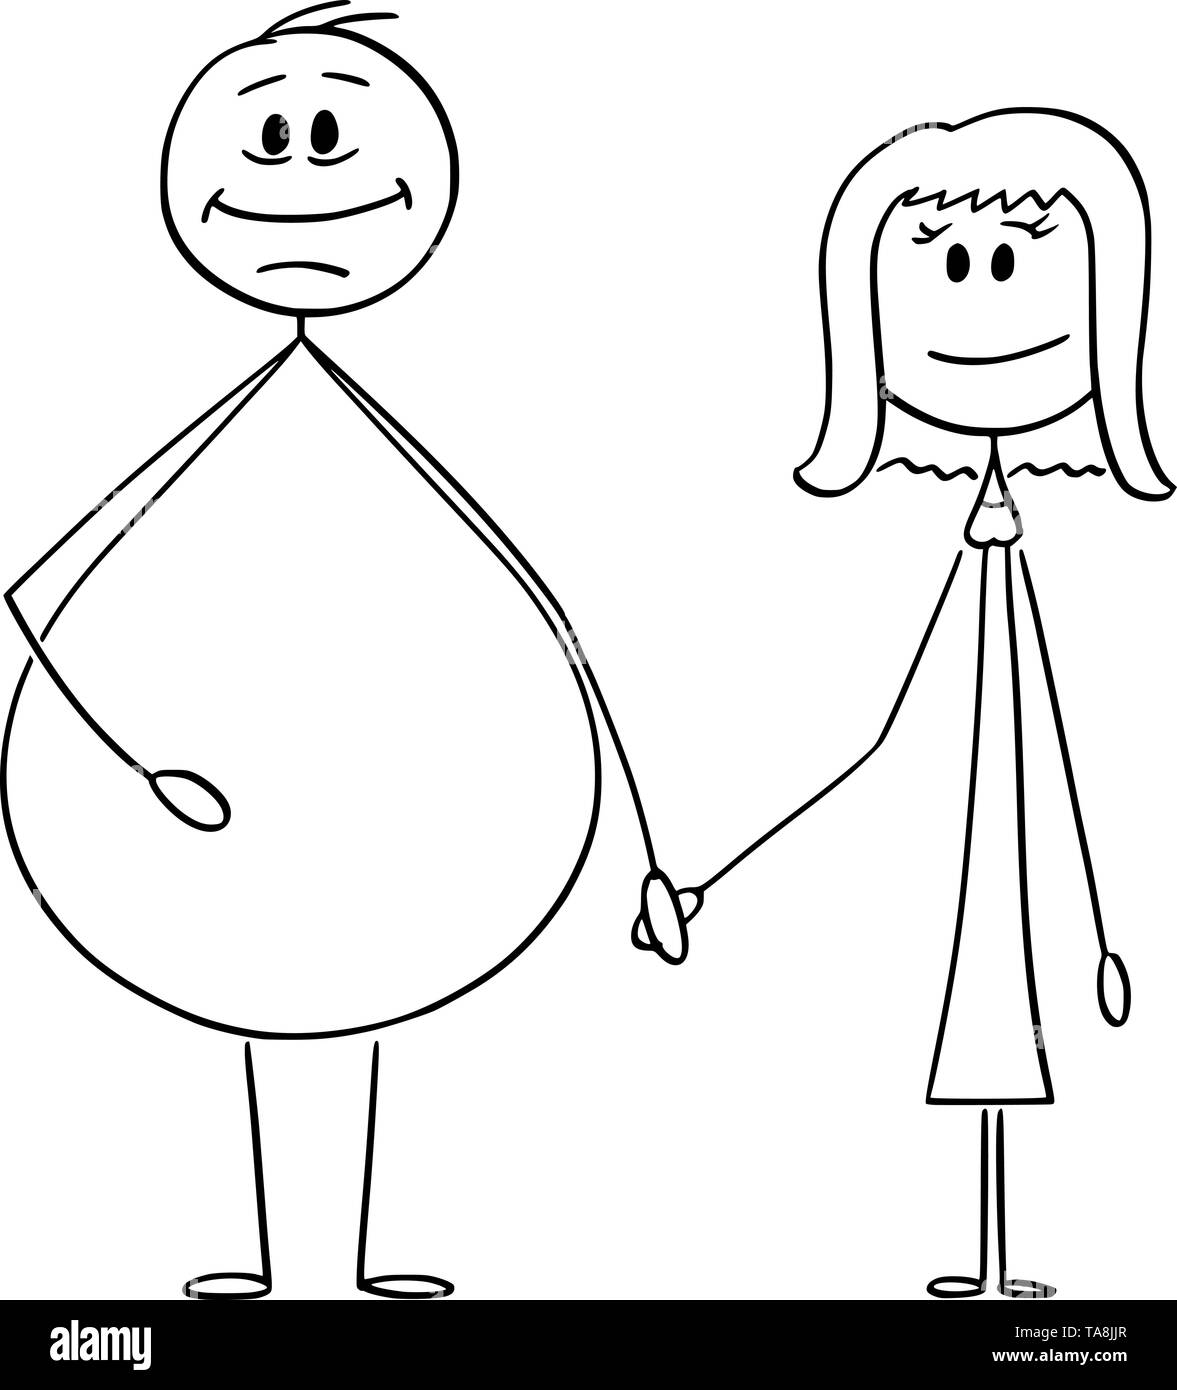 Vector cartoon stick figure drawing conceptual illustration of heterosexual couple of overweight or obese man and slim woman holding hands. Stock Vector